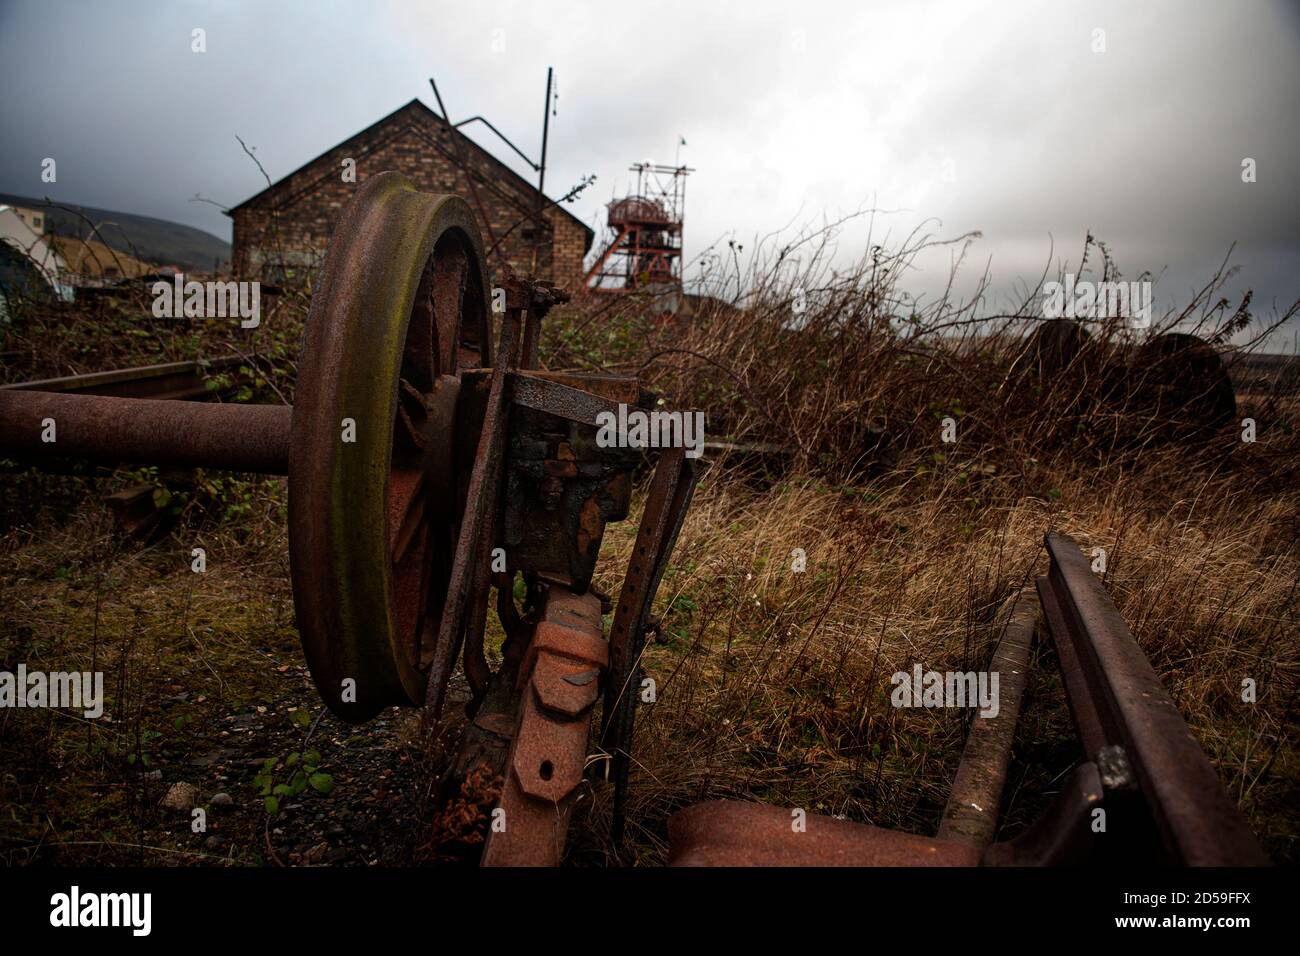 Iron machine parts discarded at Big Pit former coal mine at UNESCO World Heritage Site, Blaenavon Industrial Landscape, South Wales, United Kingdom Stock Photo